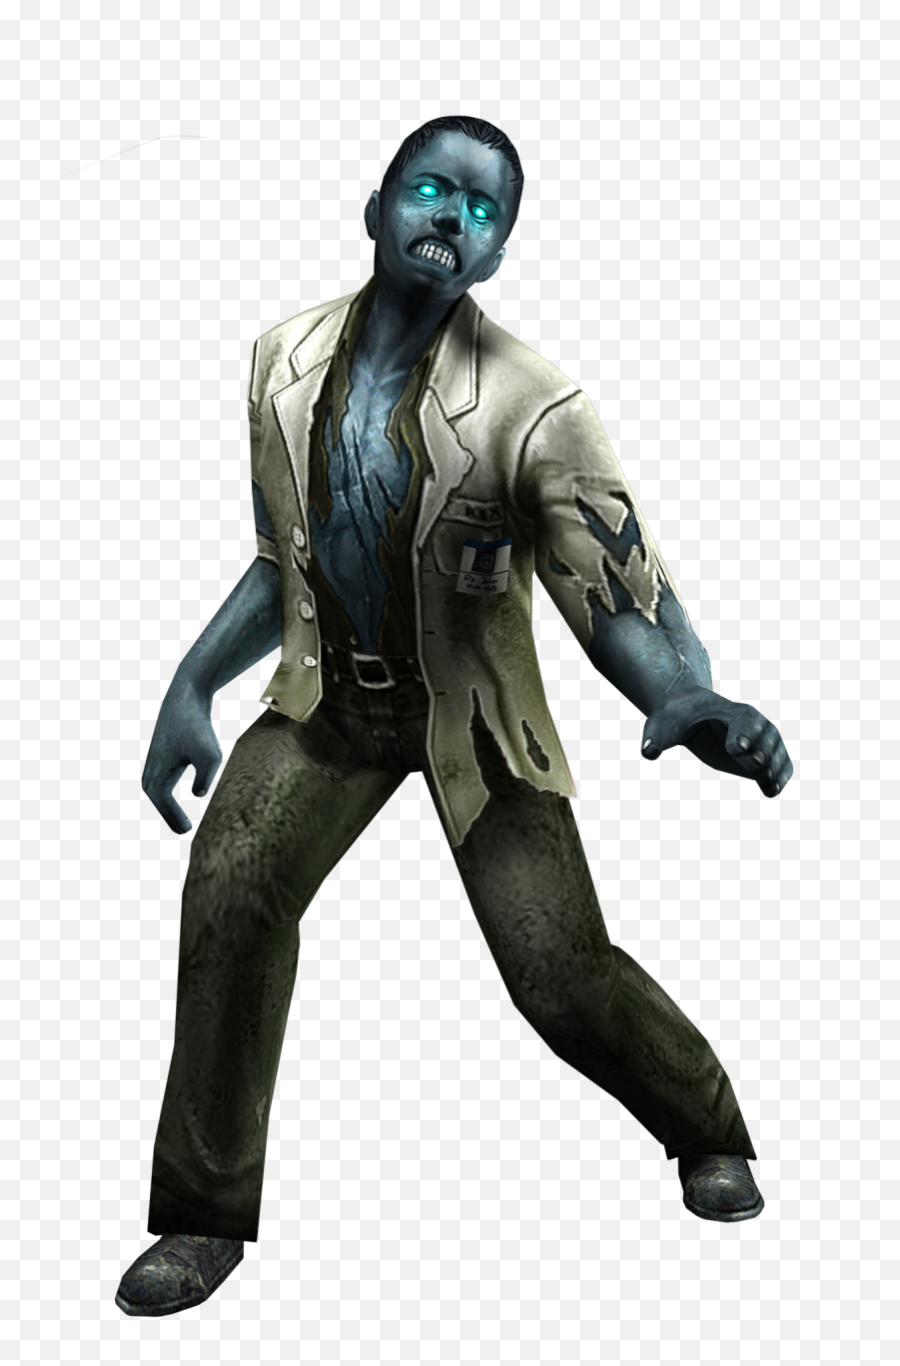 Free Pngs - Zombie Png Images Zombie Transparent Background,Gamora Png